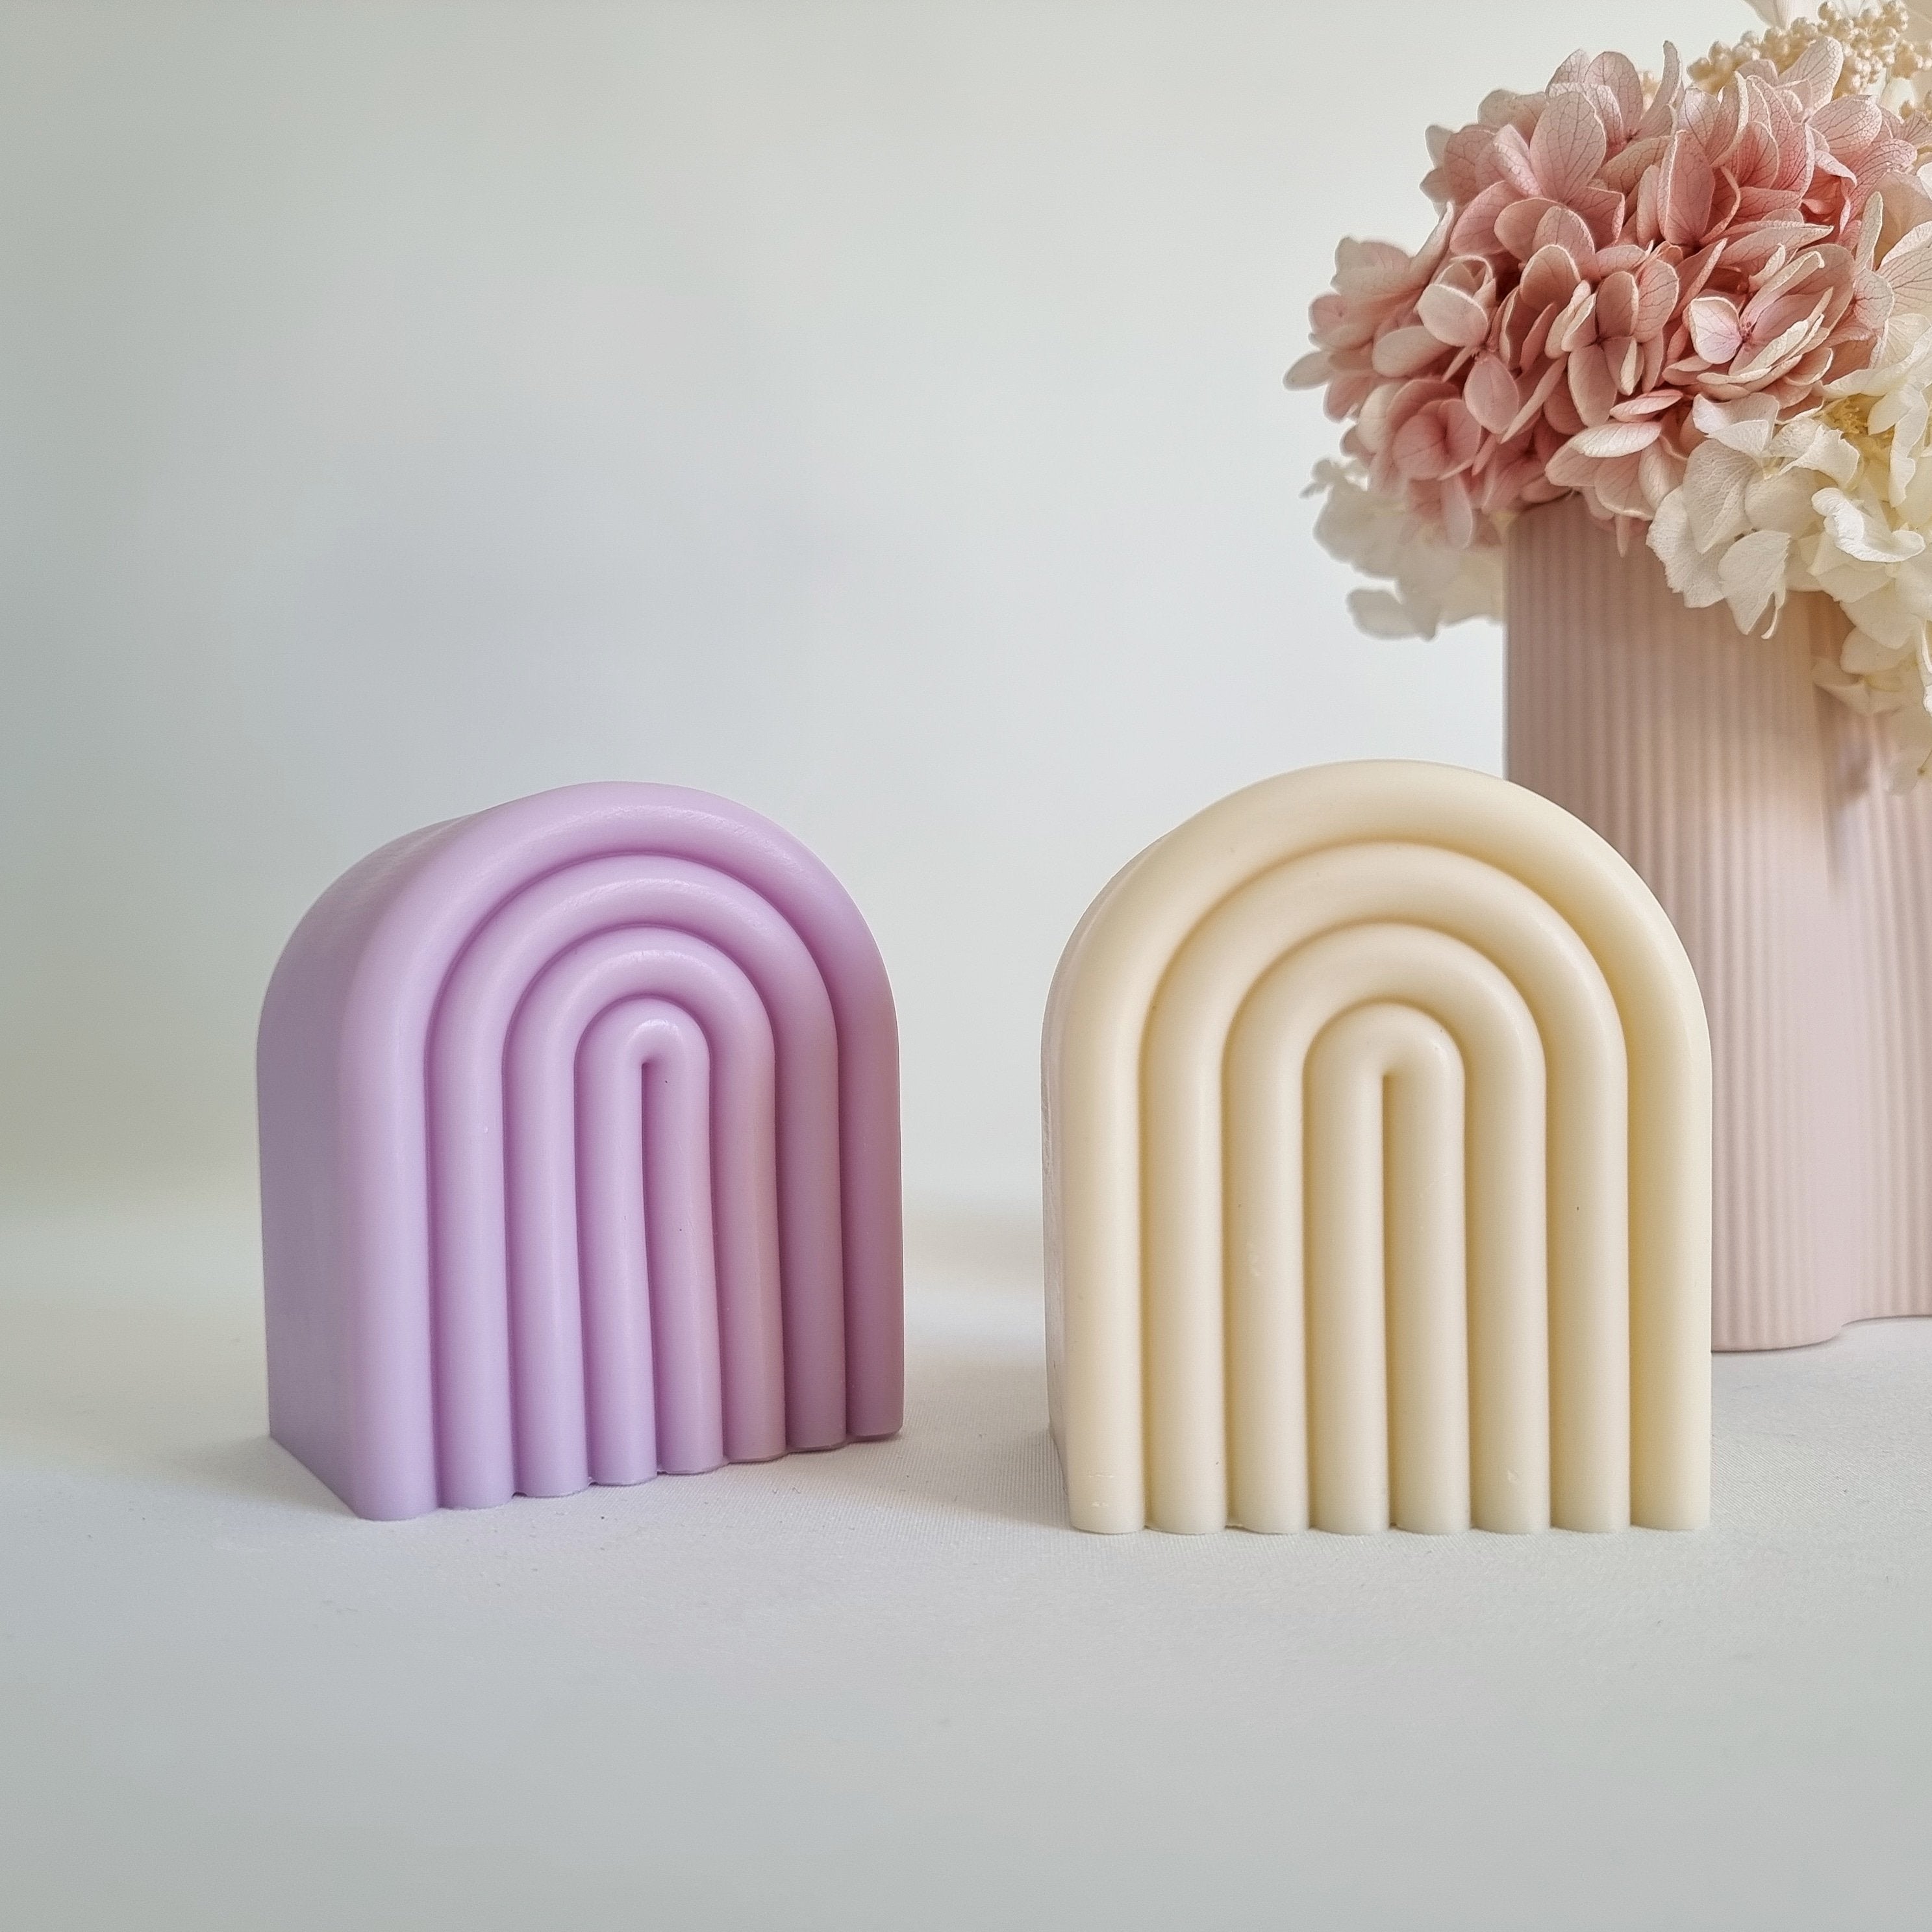 Rainbow Candle Mould 1 - Silicone Mould, Mold for DIY Candles. Created using candle making kit with cotton candle wicks and candle colour chips. Using soy wax for pillar candles. Sold by Myka Candles Moulds Australia